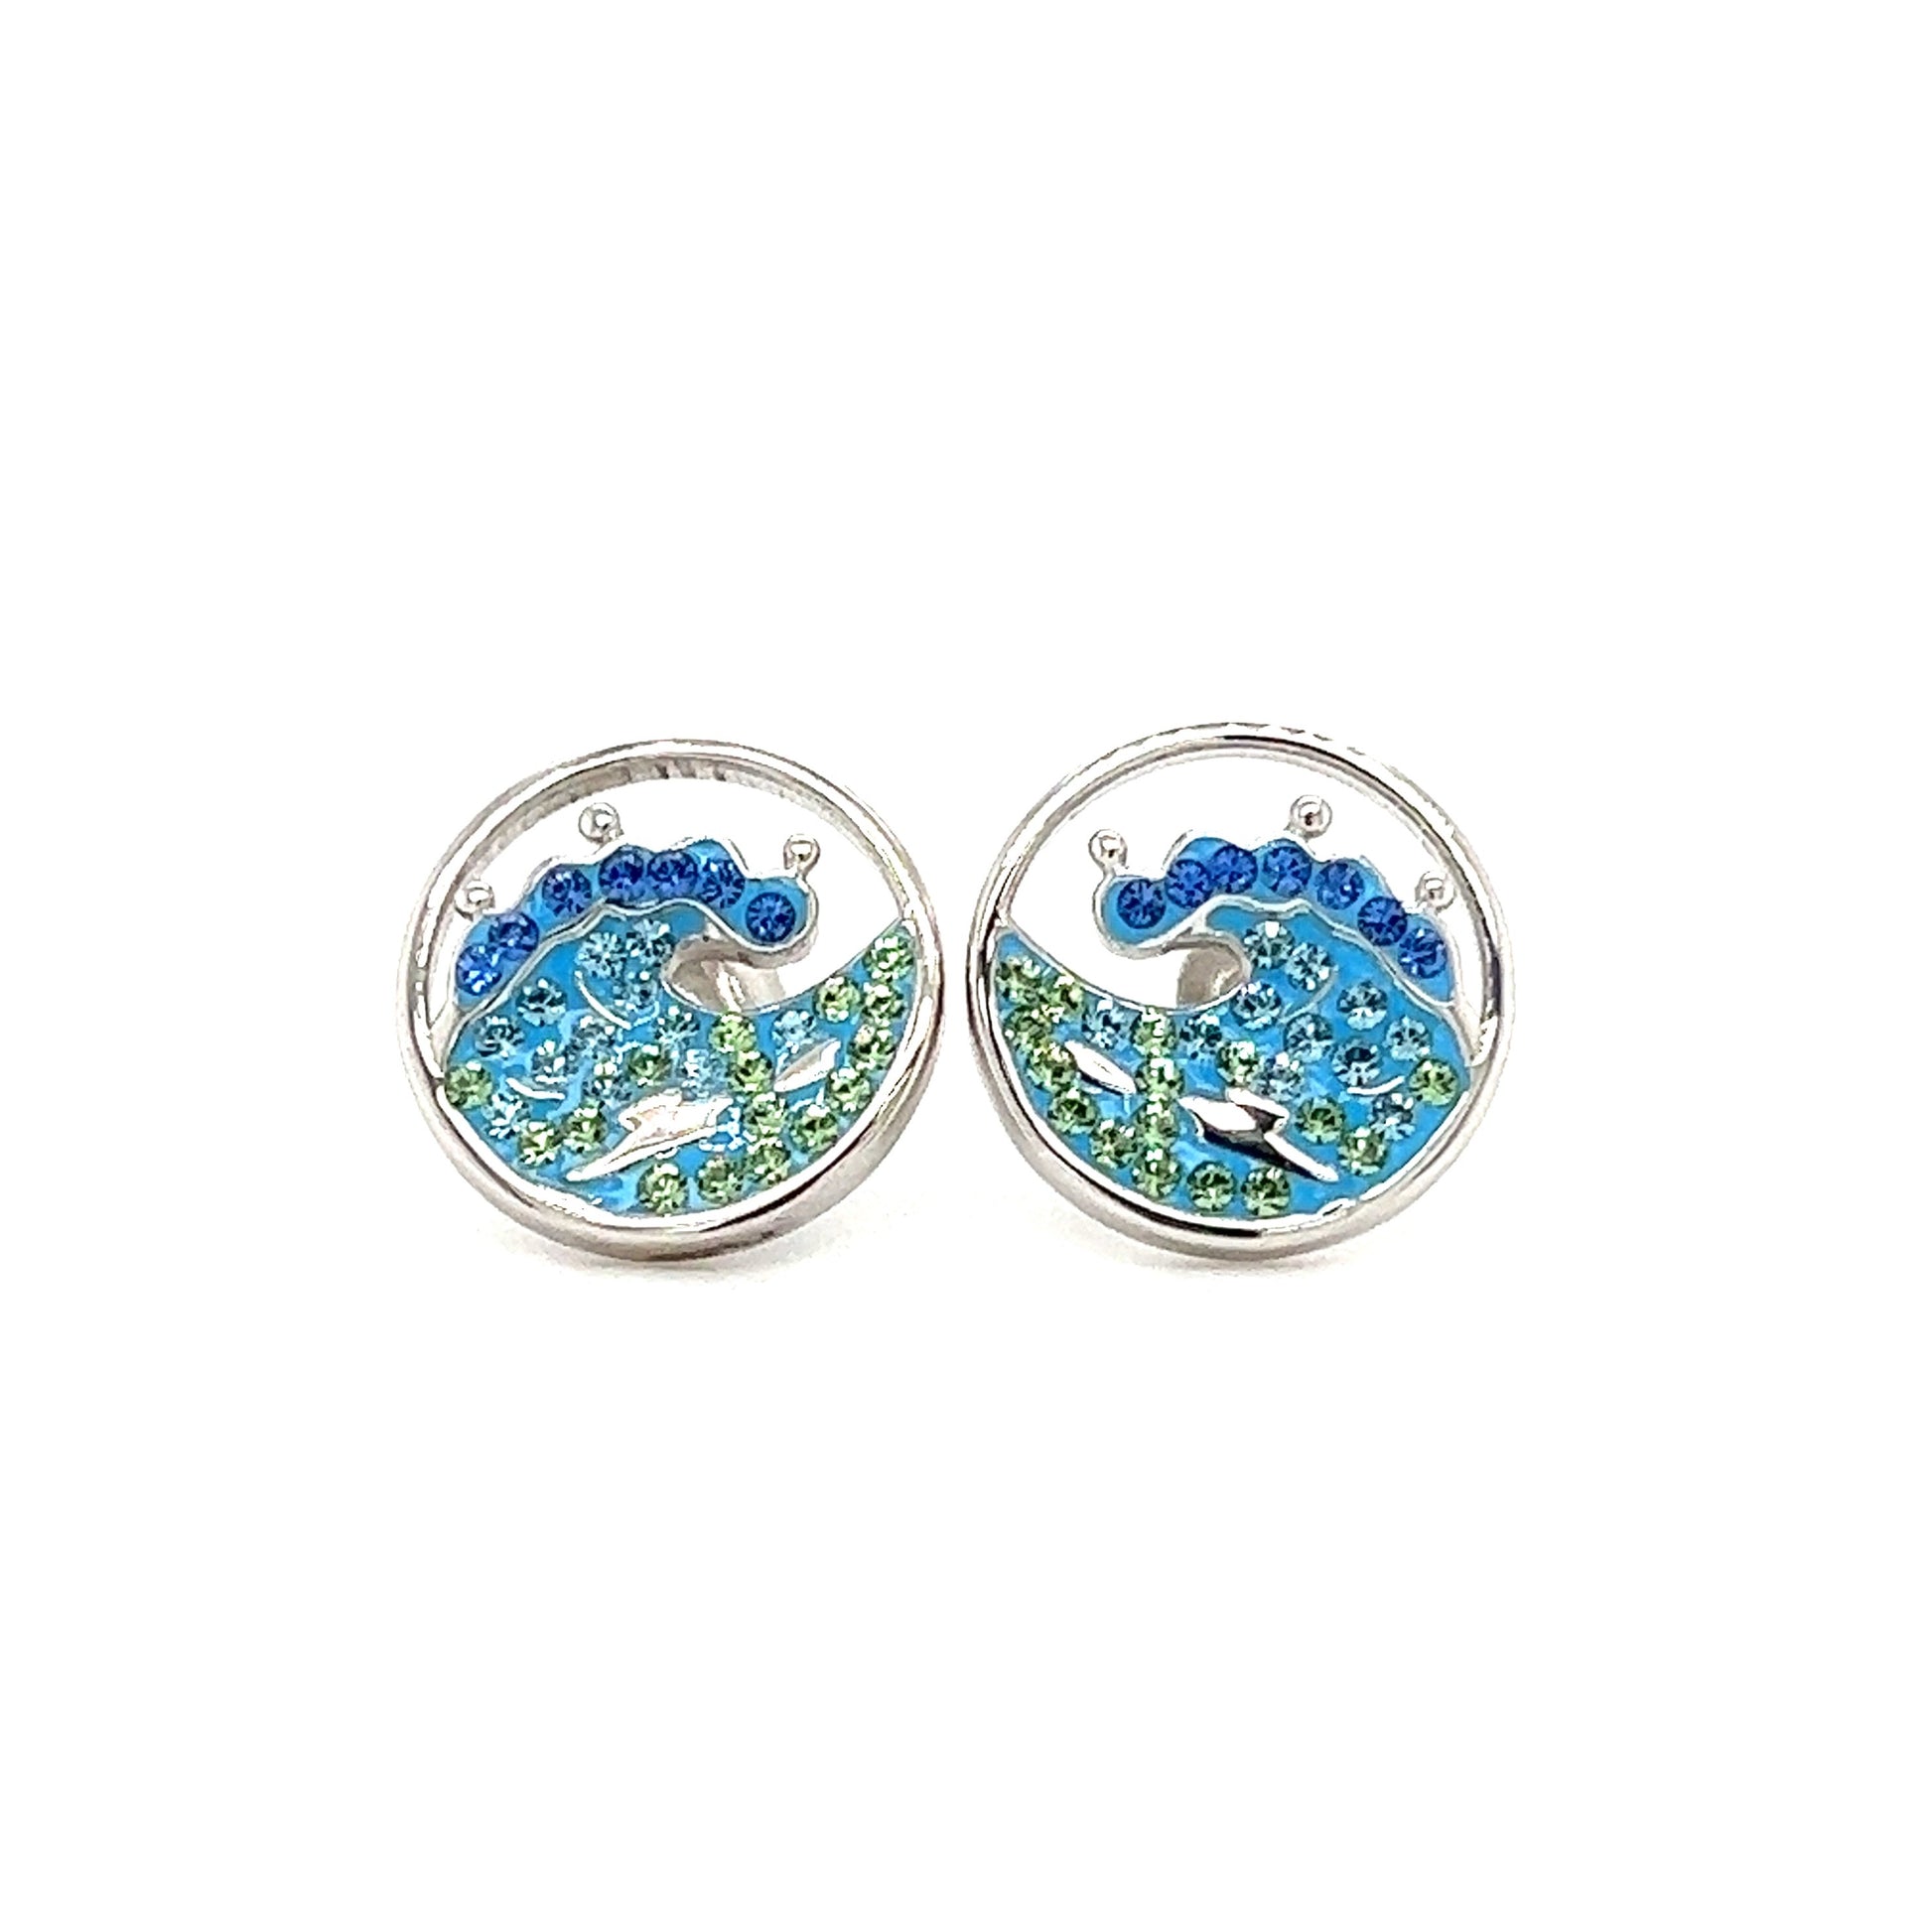 Wave Stud Earrings with Blue, Aqua and Green Crystals in Sterling Silver. Front View